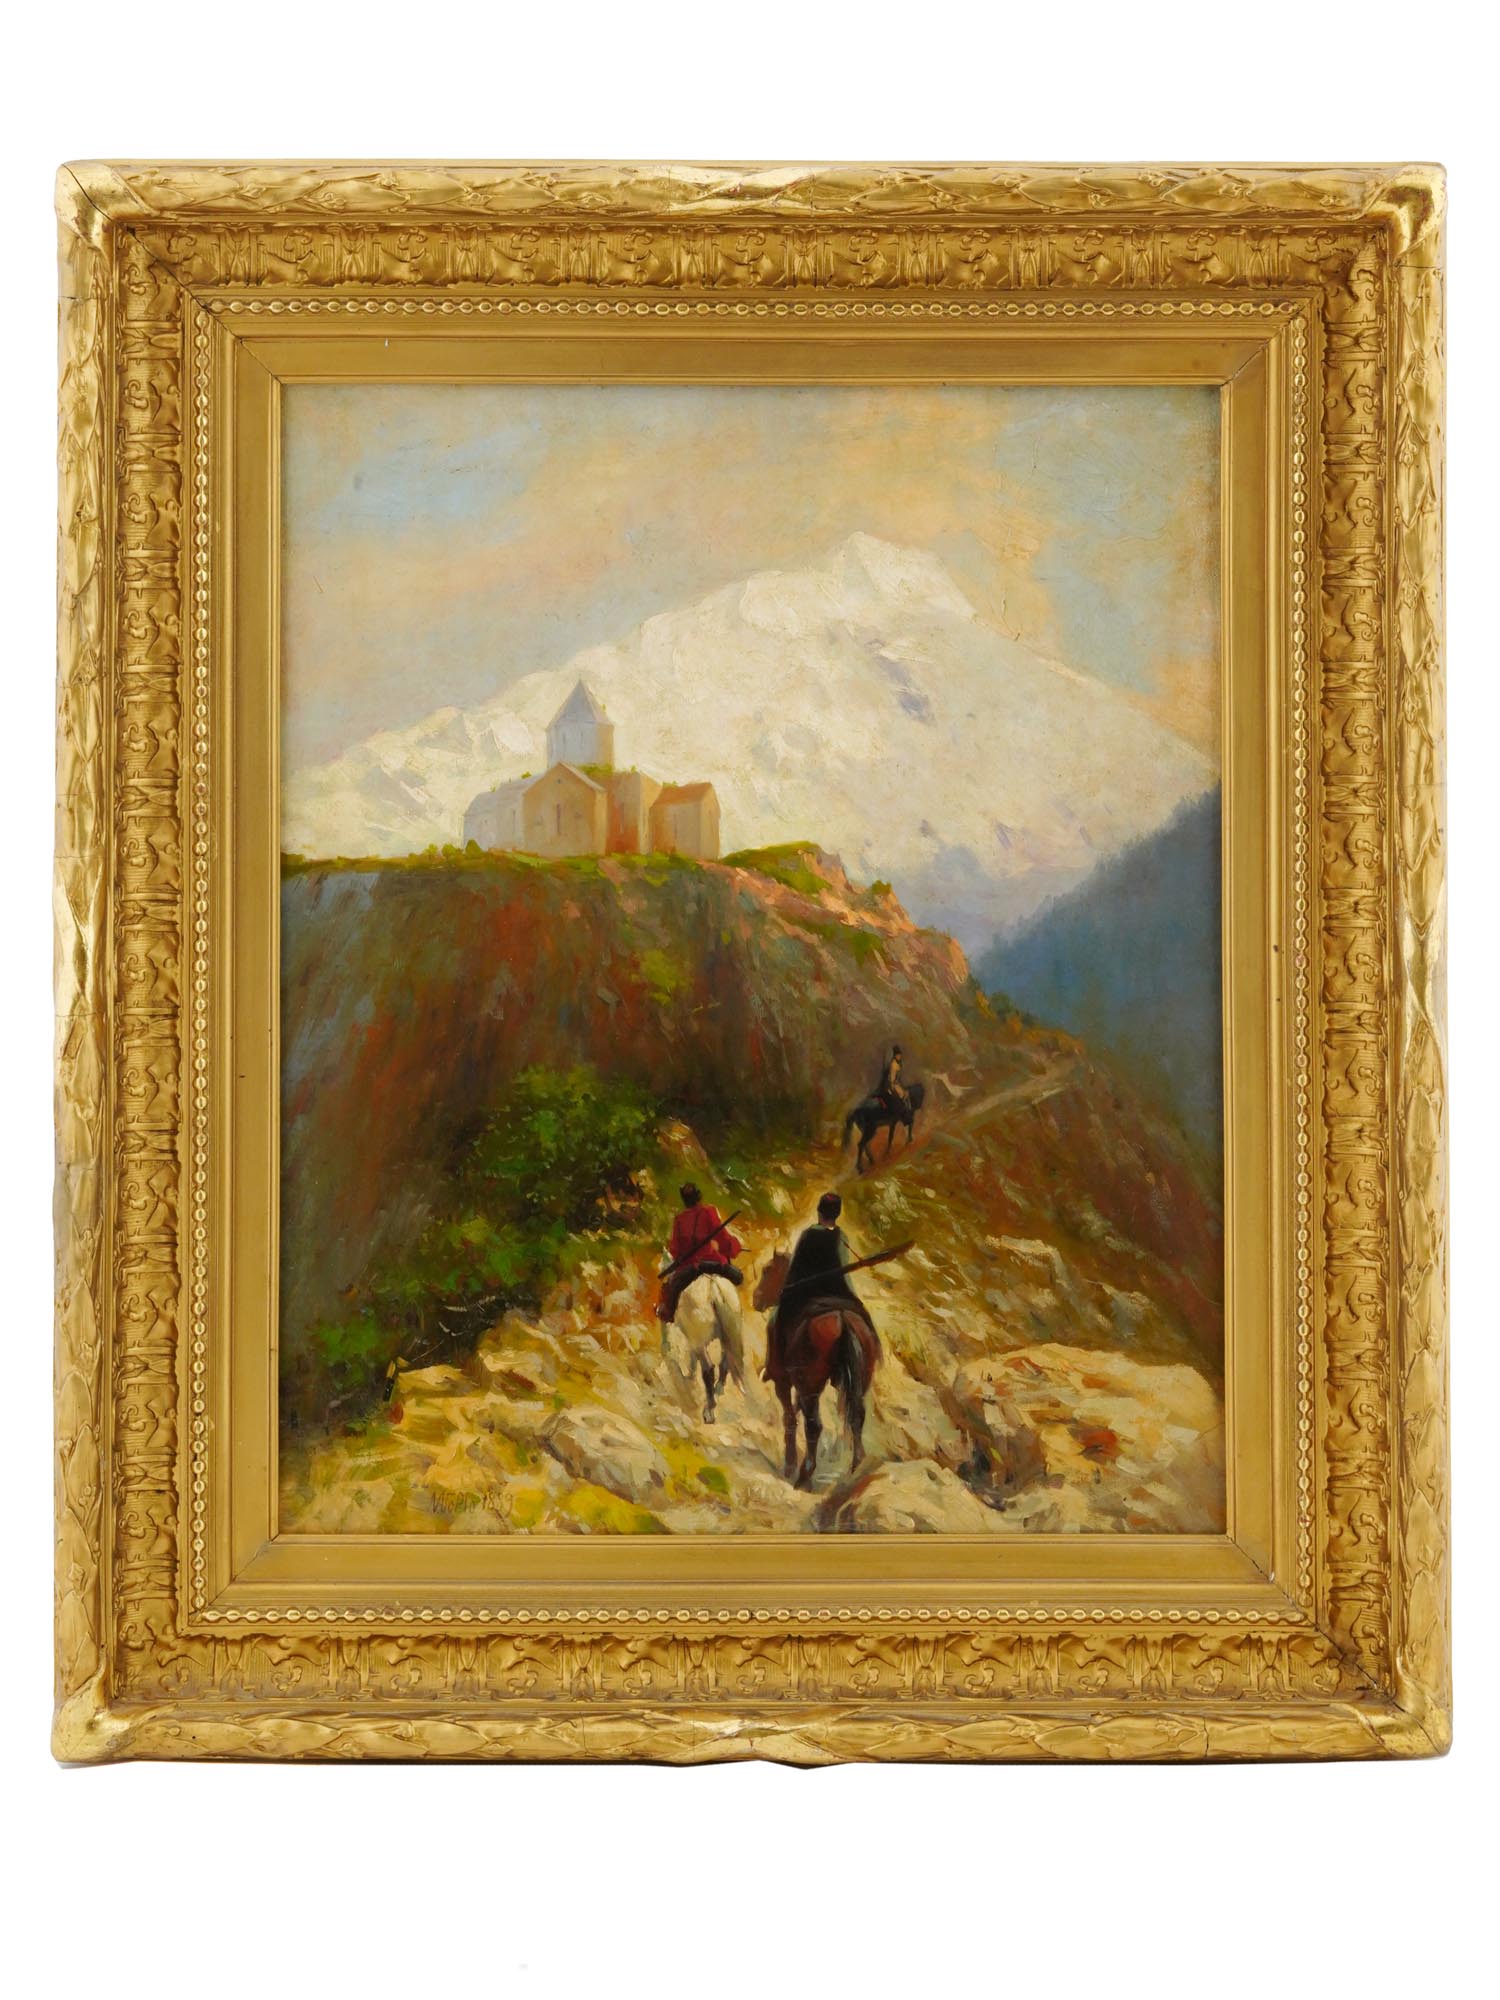 ANTIQUE RUSSIAN CASTLE OIL PAINTING BY LEV LAGORIO PIC-0